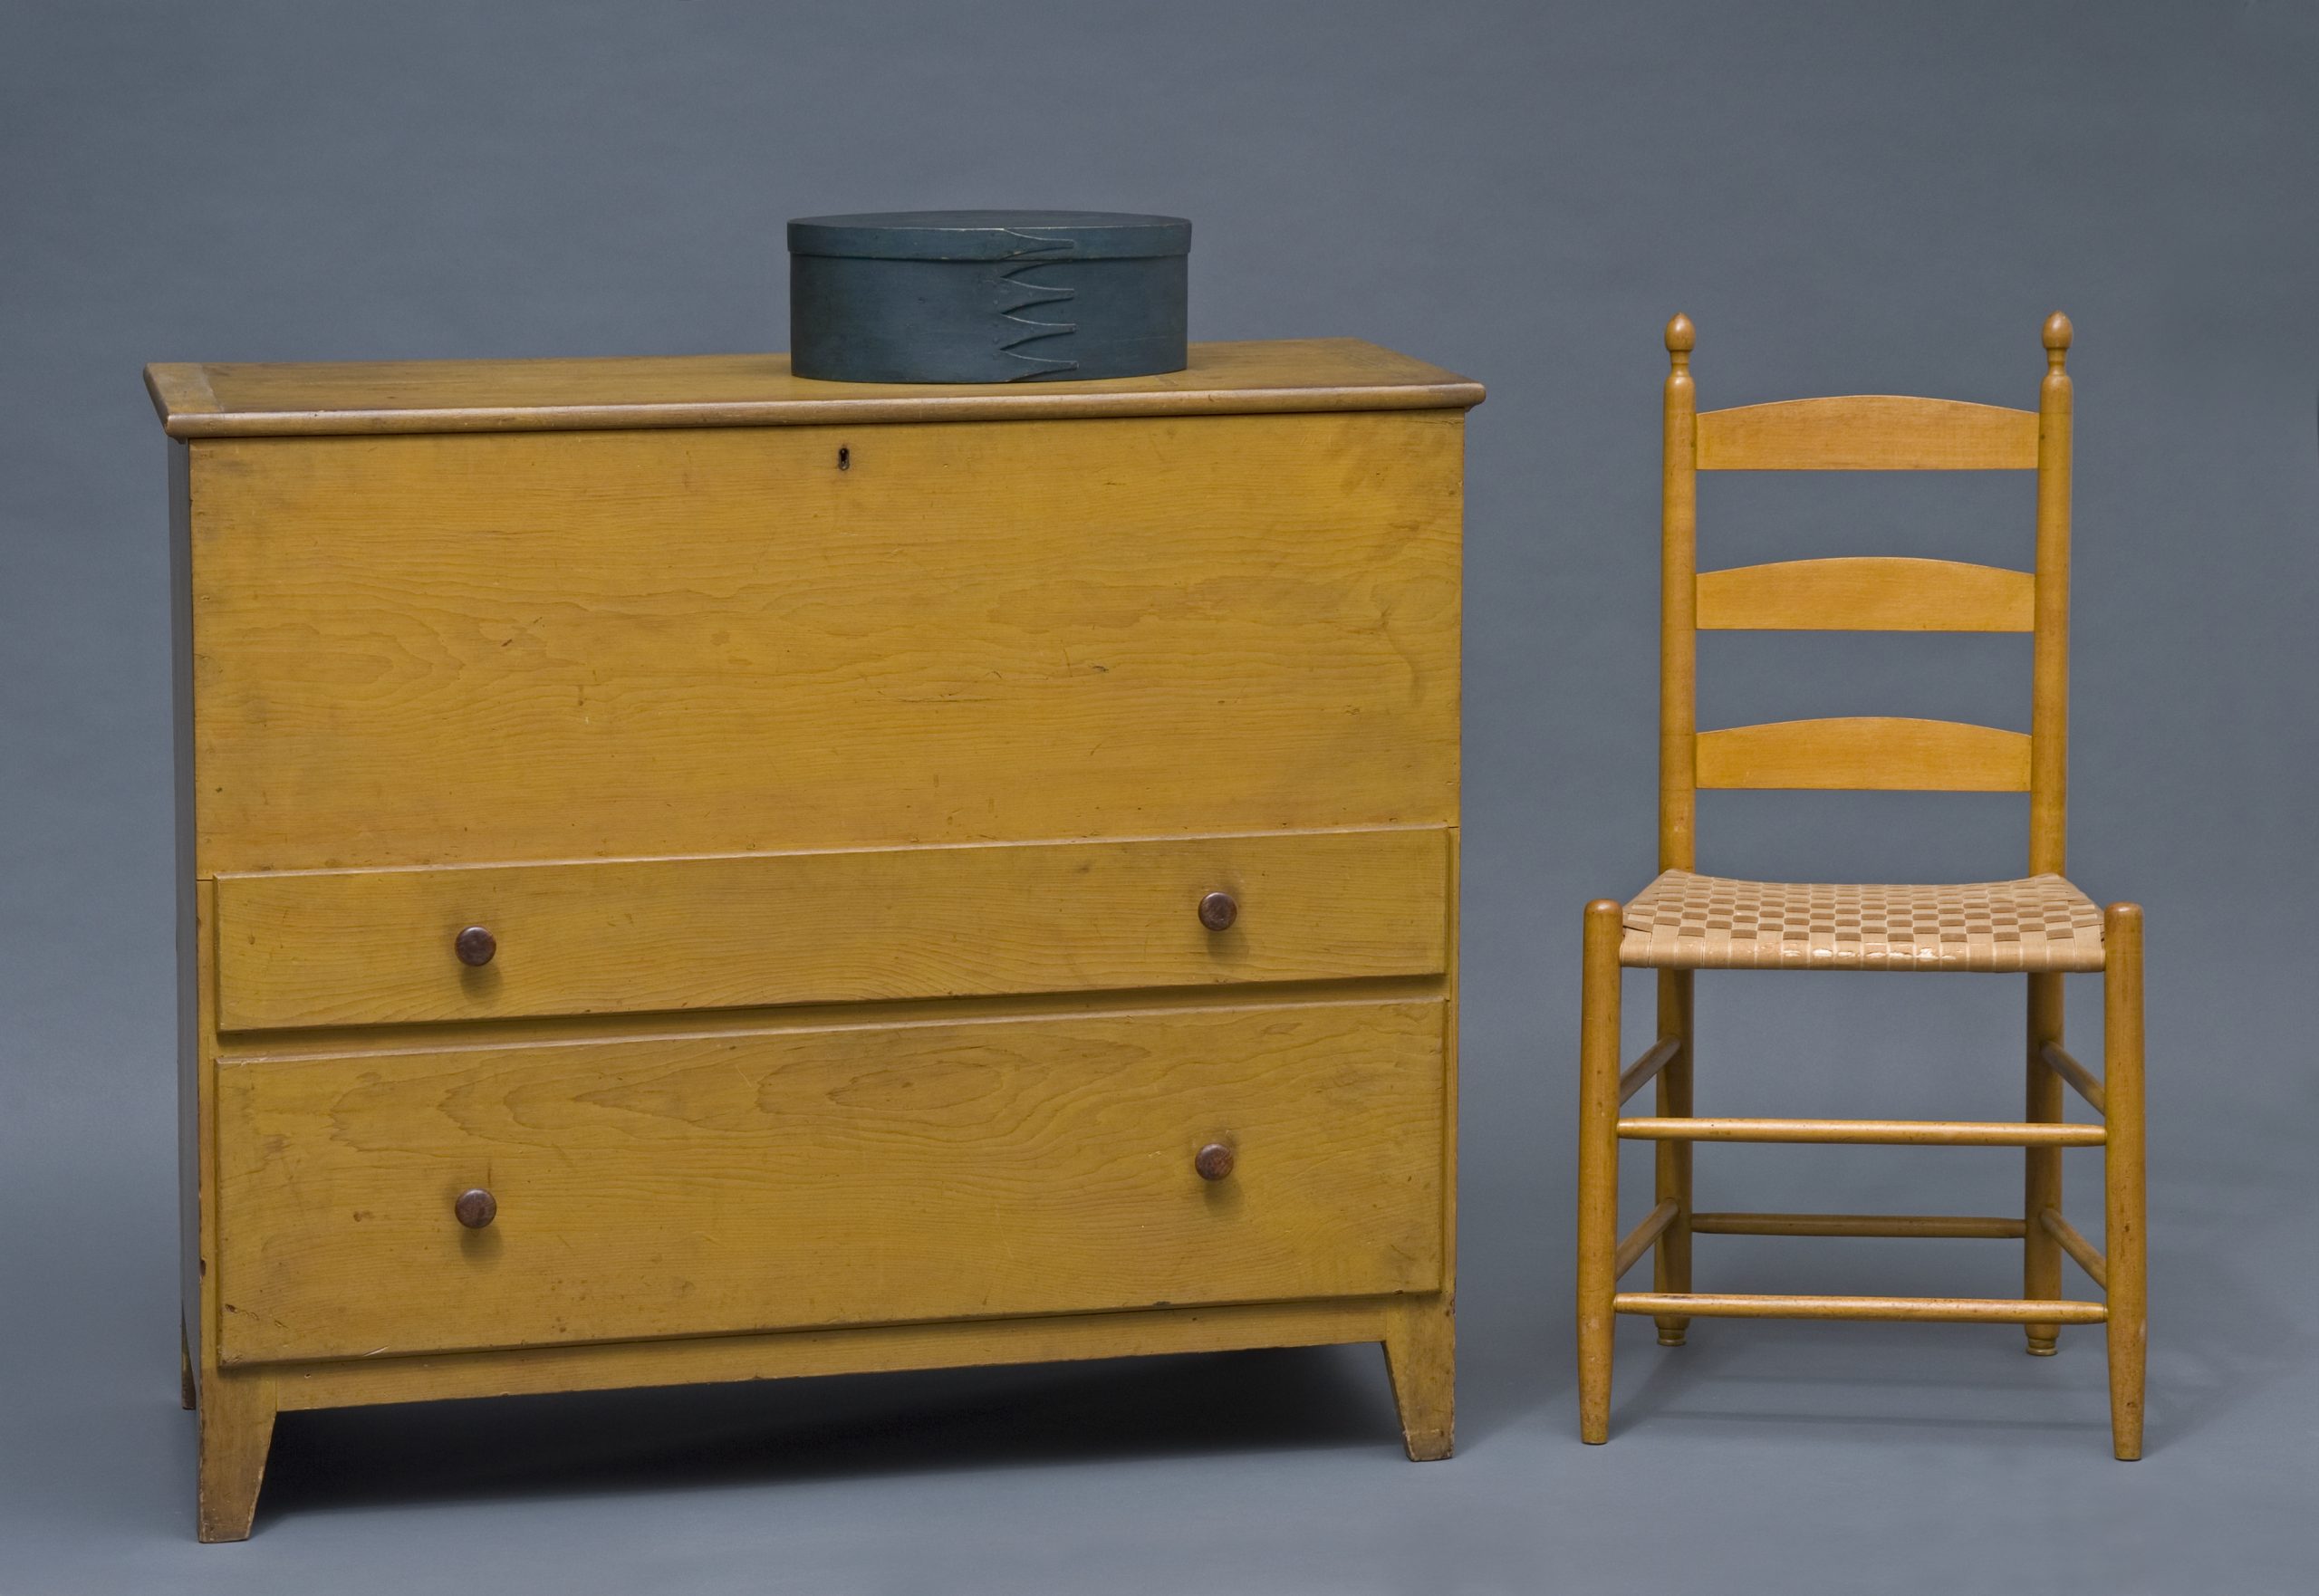 A yellow dresser and chair next to a gray background.